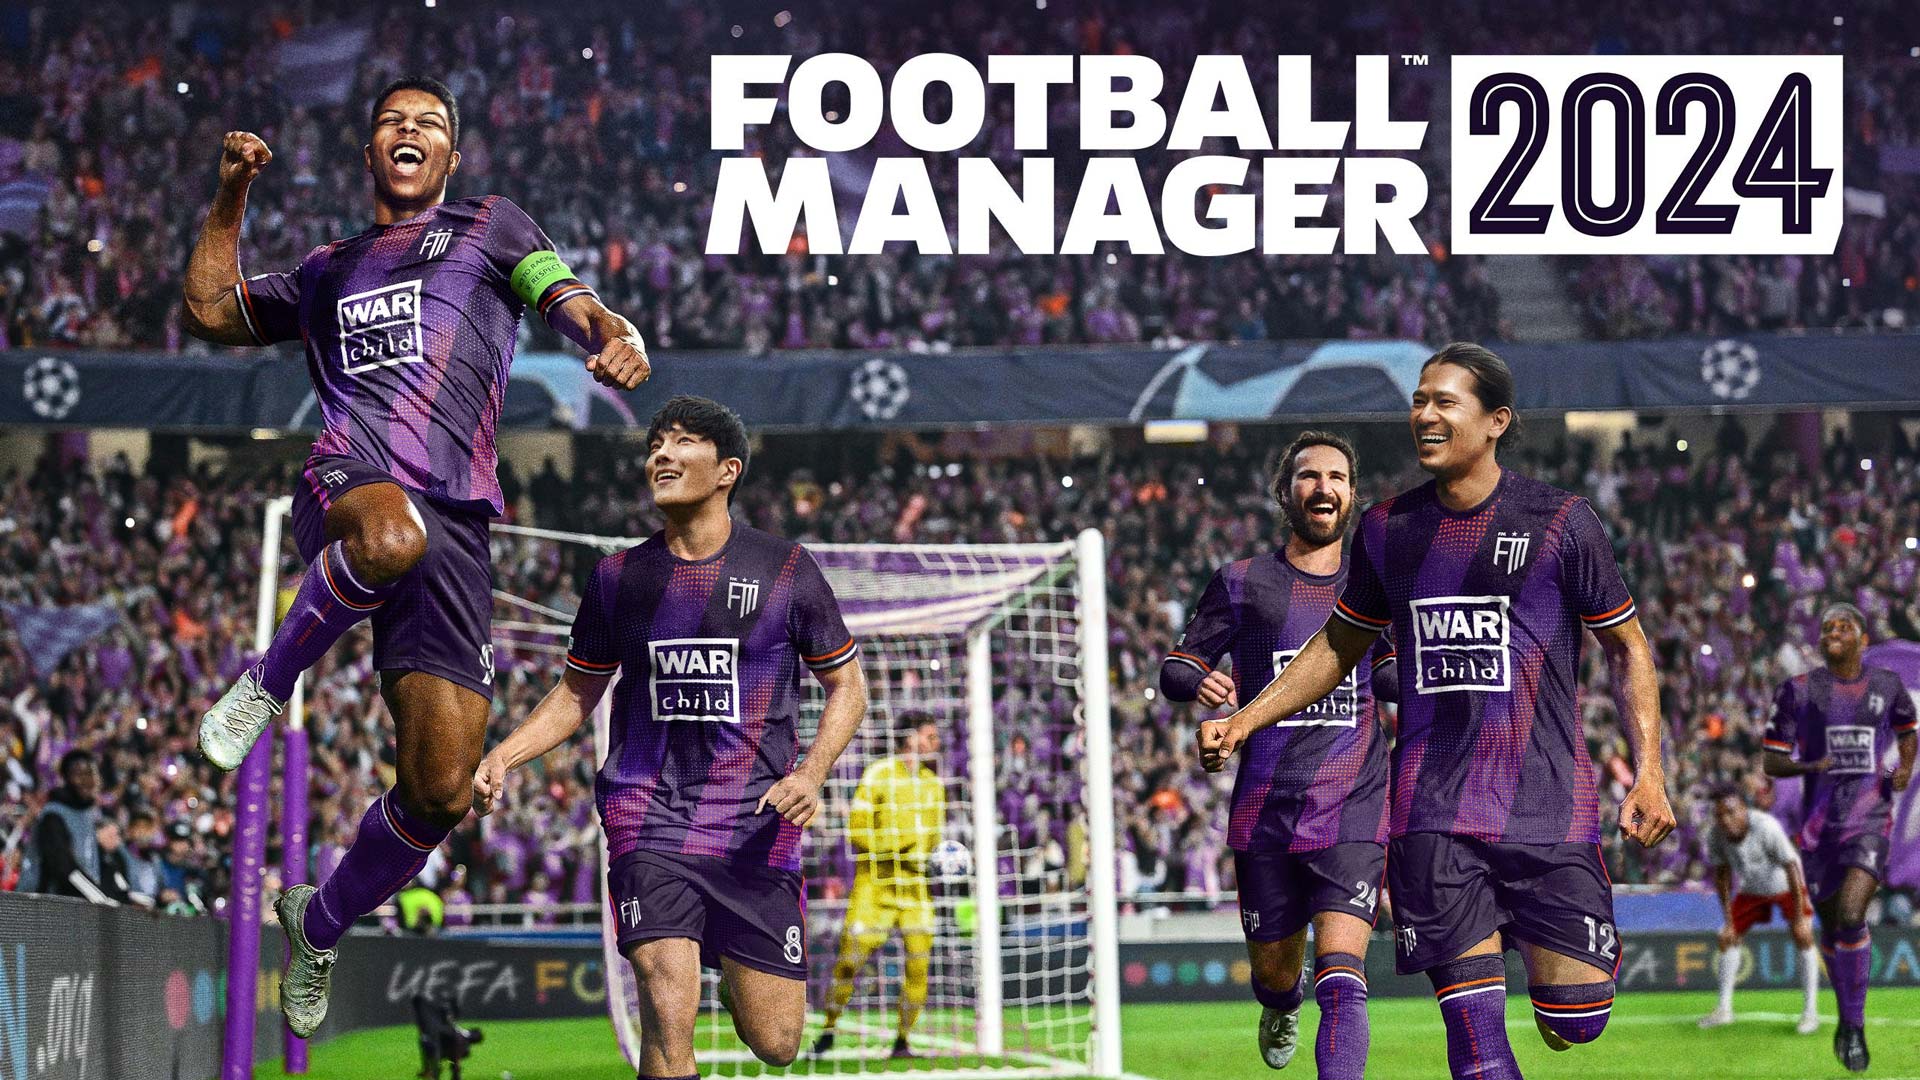 Football Manager 2024 Release Date and Platforms Announced Archysport